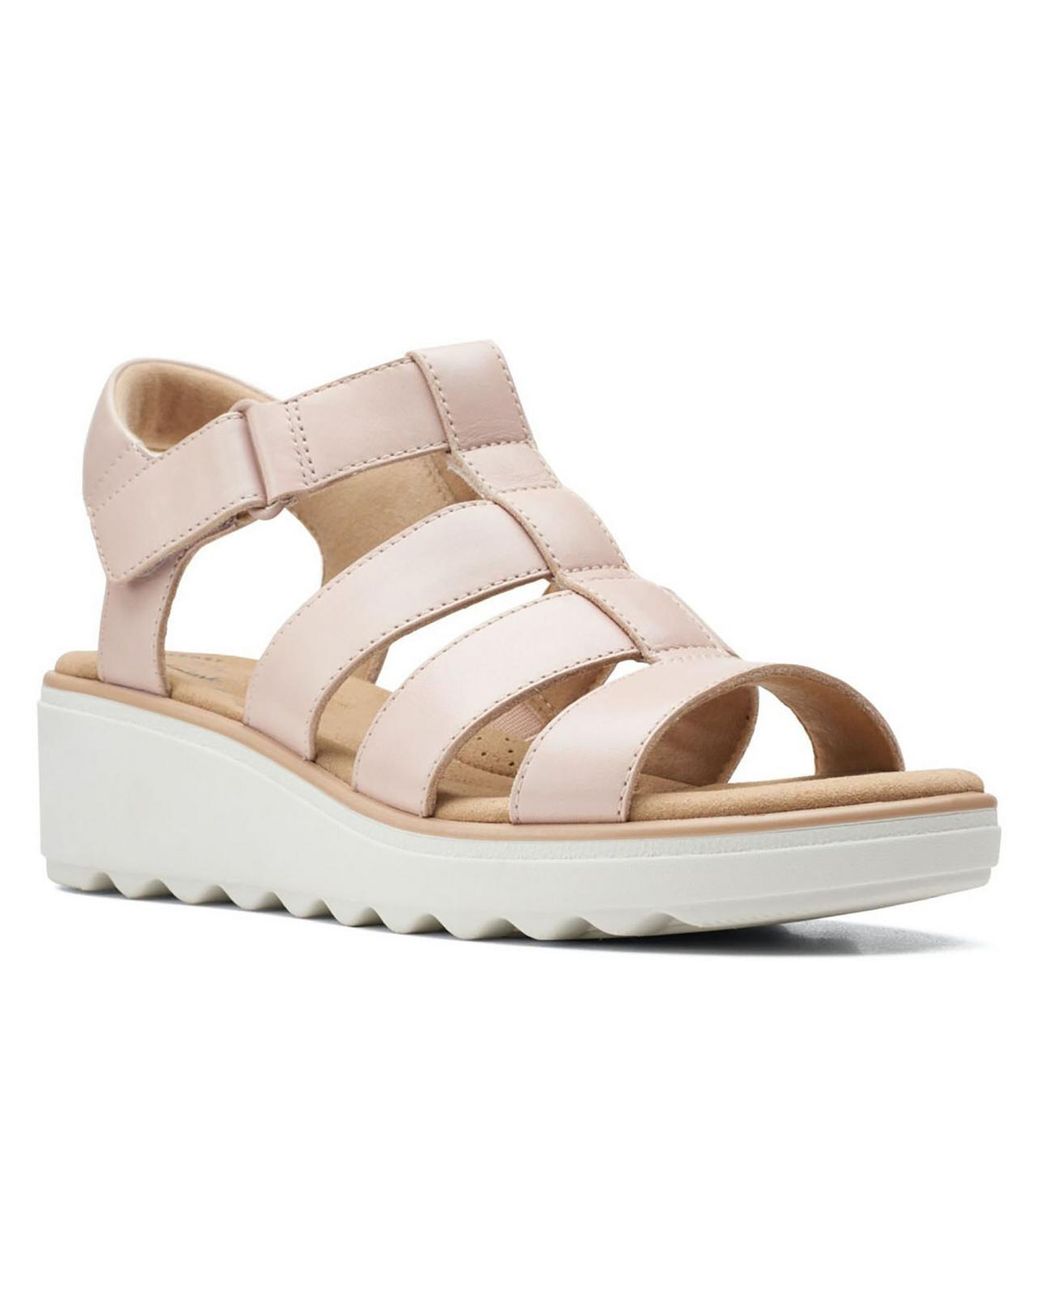 Clarks Jillian Quartz Padded Insole Faux Leather Wedge Sandals in Pink |  Lyst